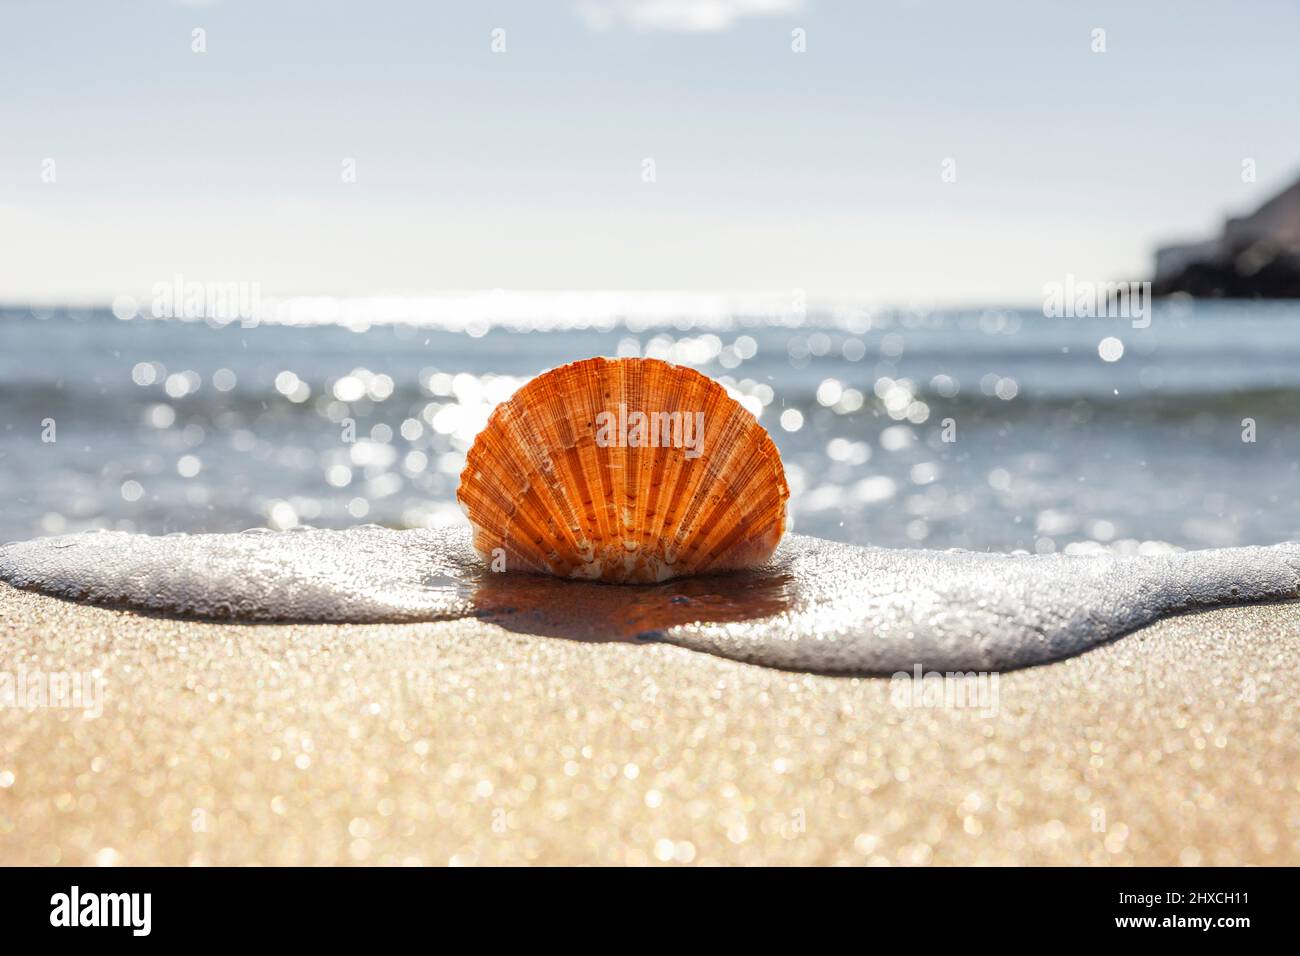 Scallop on beach with sea in background Stock Photo